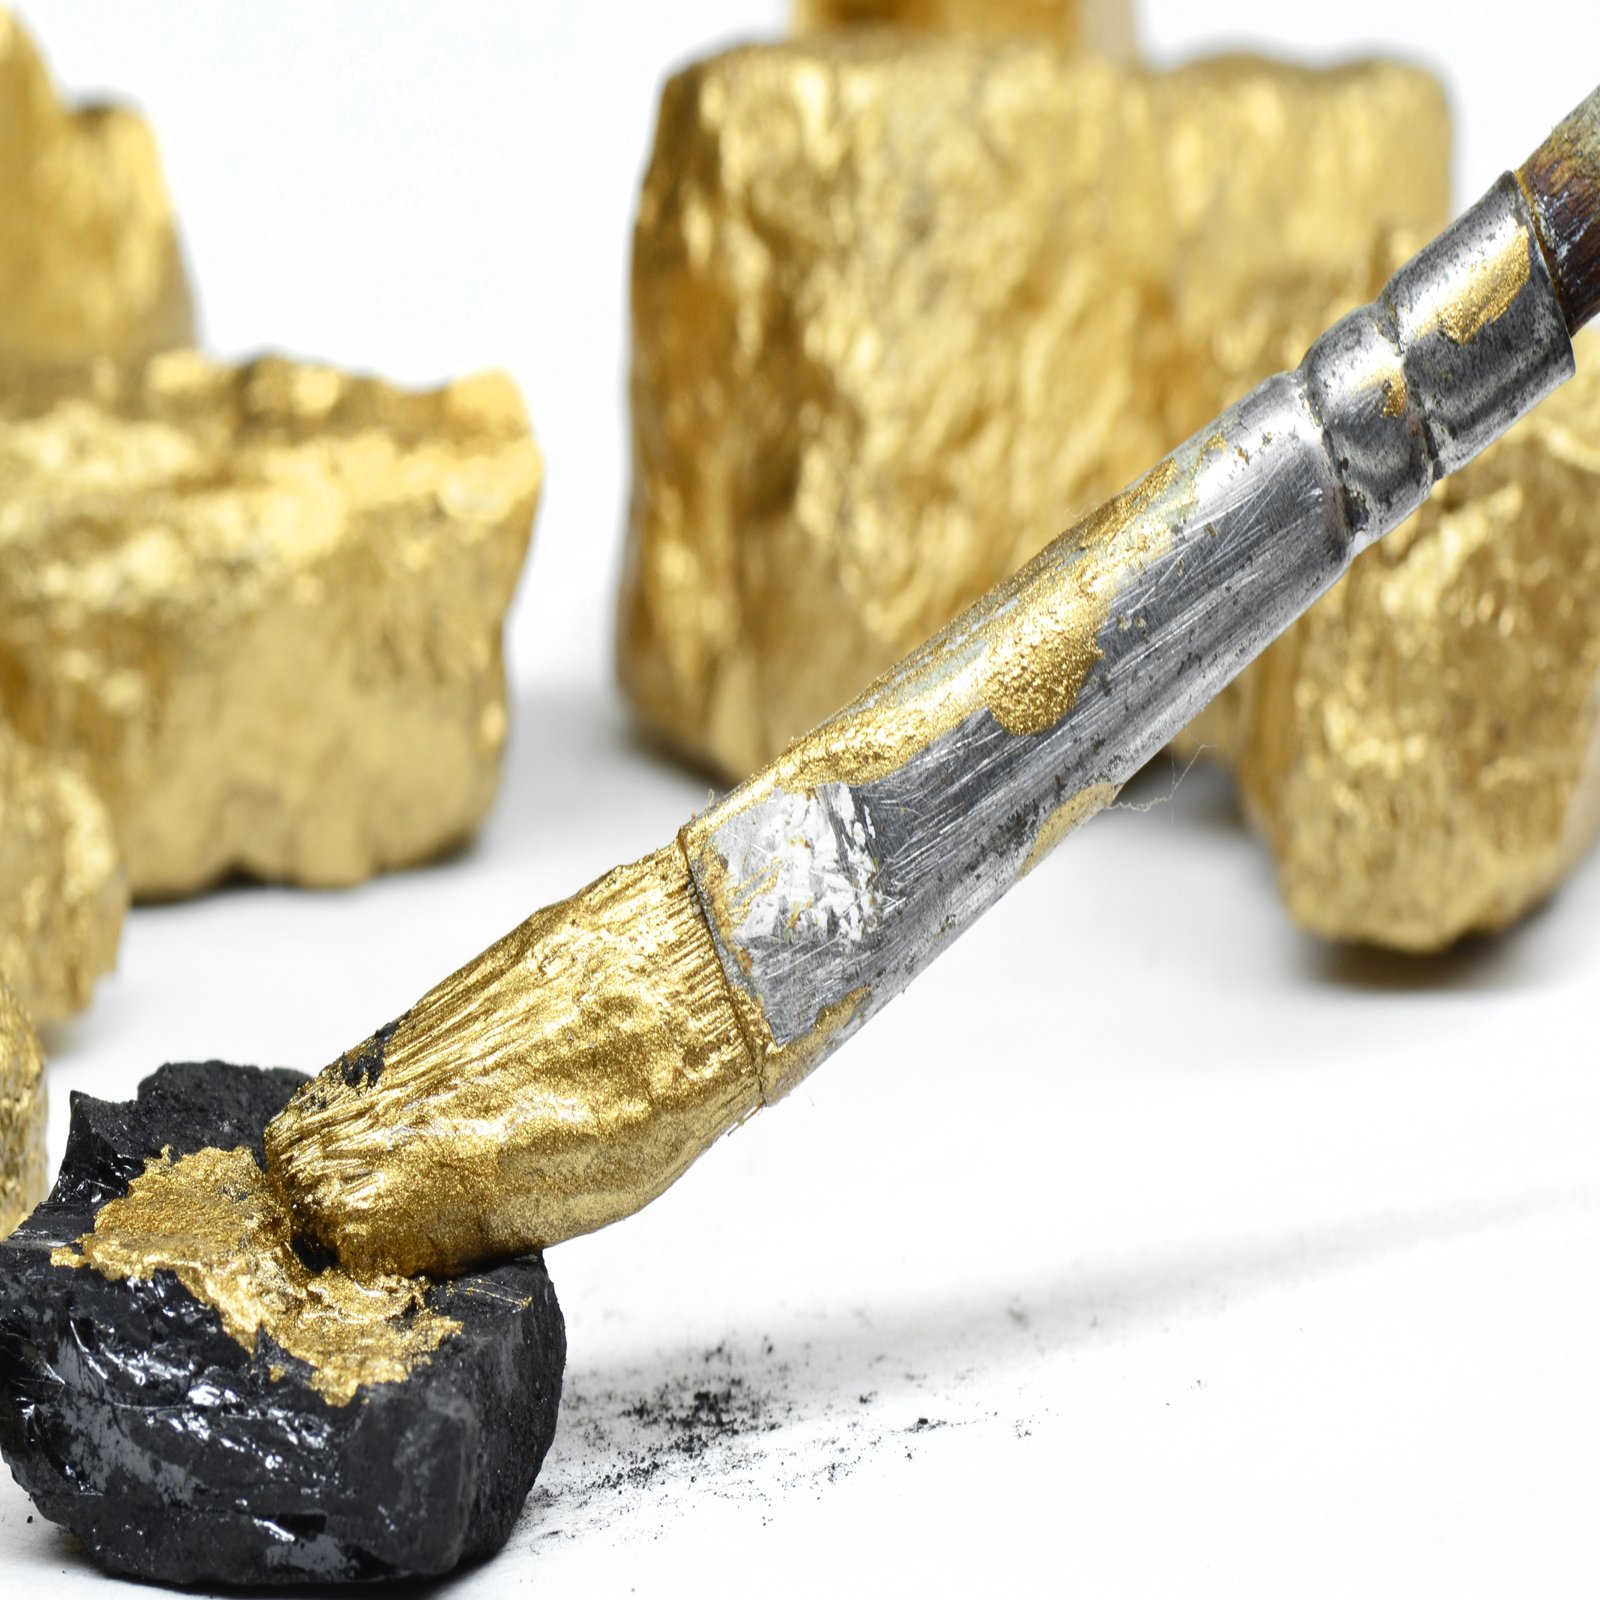 Bittrex to Delist Bitcoin Gold Over 51% Attack